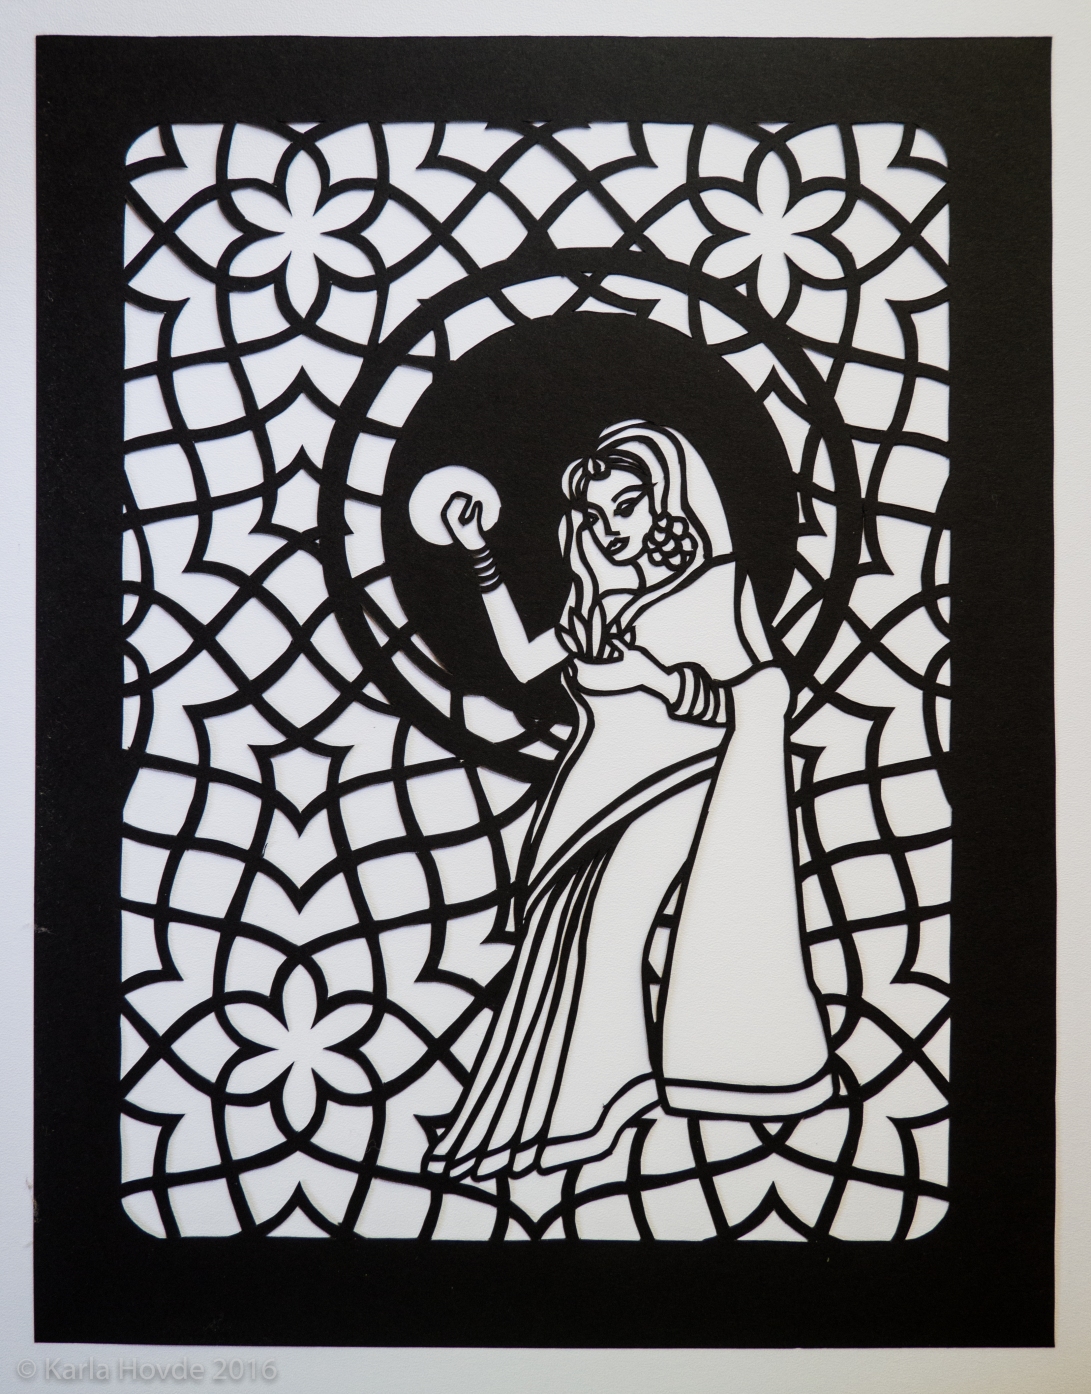 Paper cutting art in black paper shows stylized woman wearing a sari in front of delicate geometric arabesque pattern.